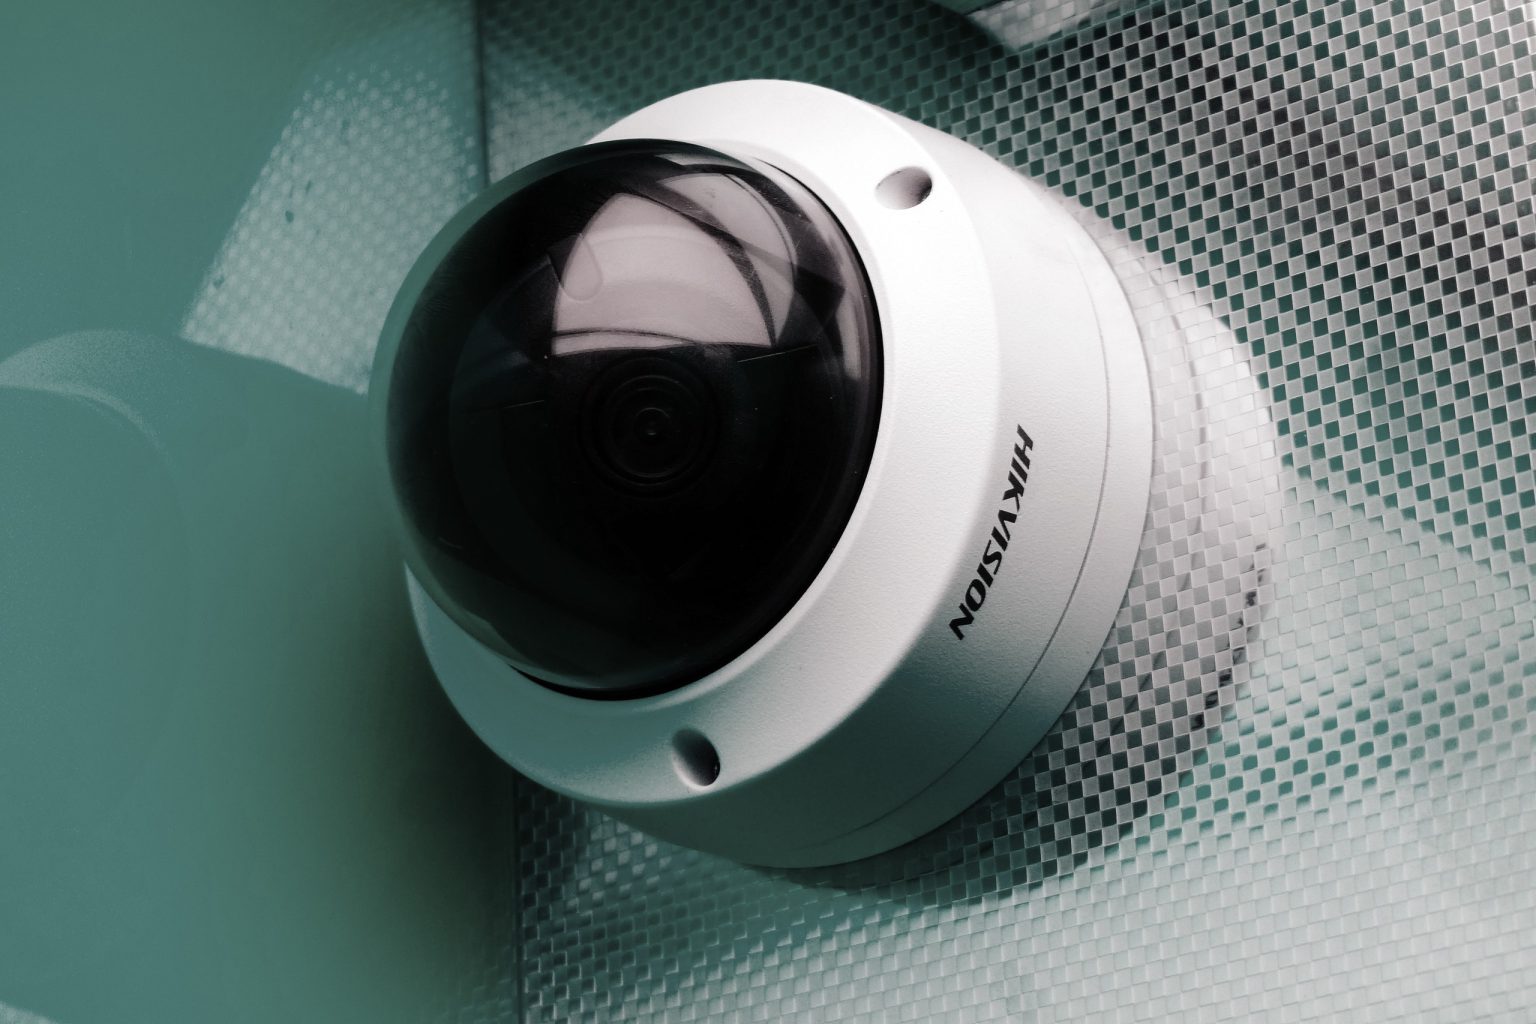 Dome security camera mounted on the wall